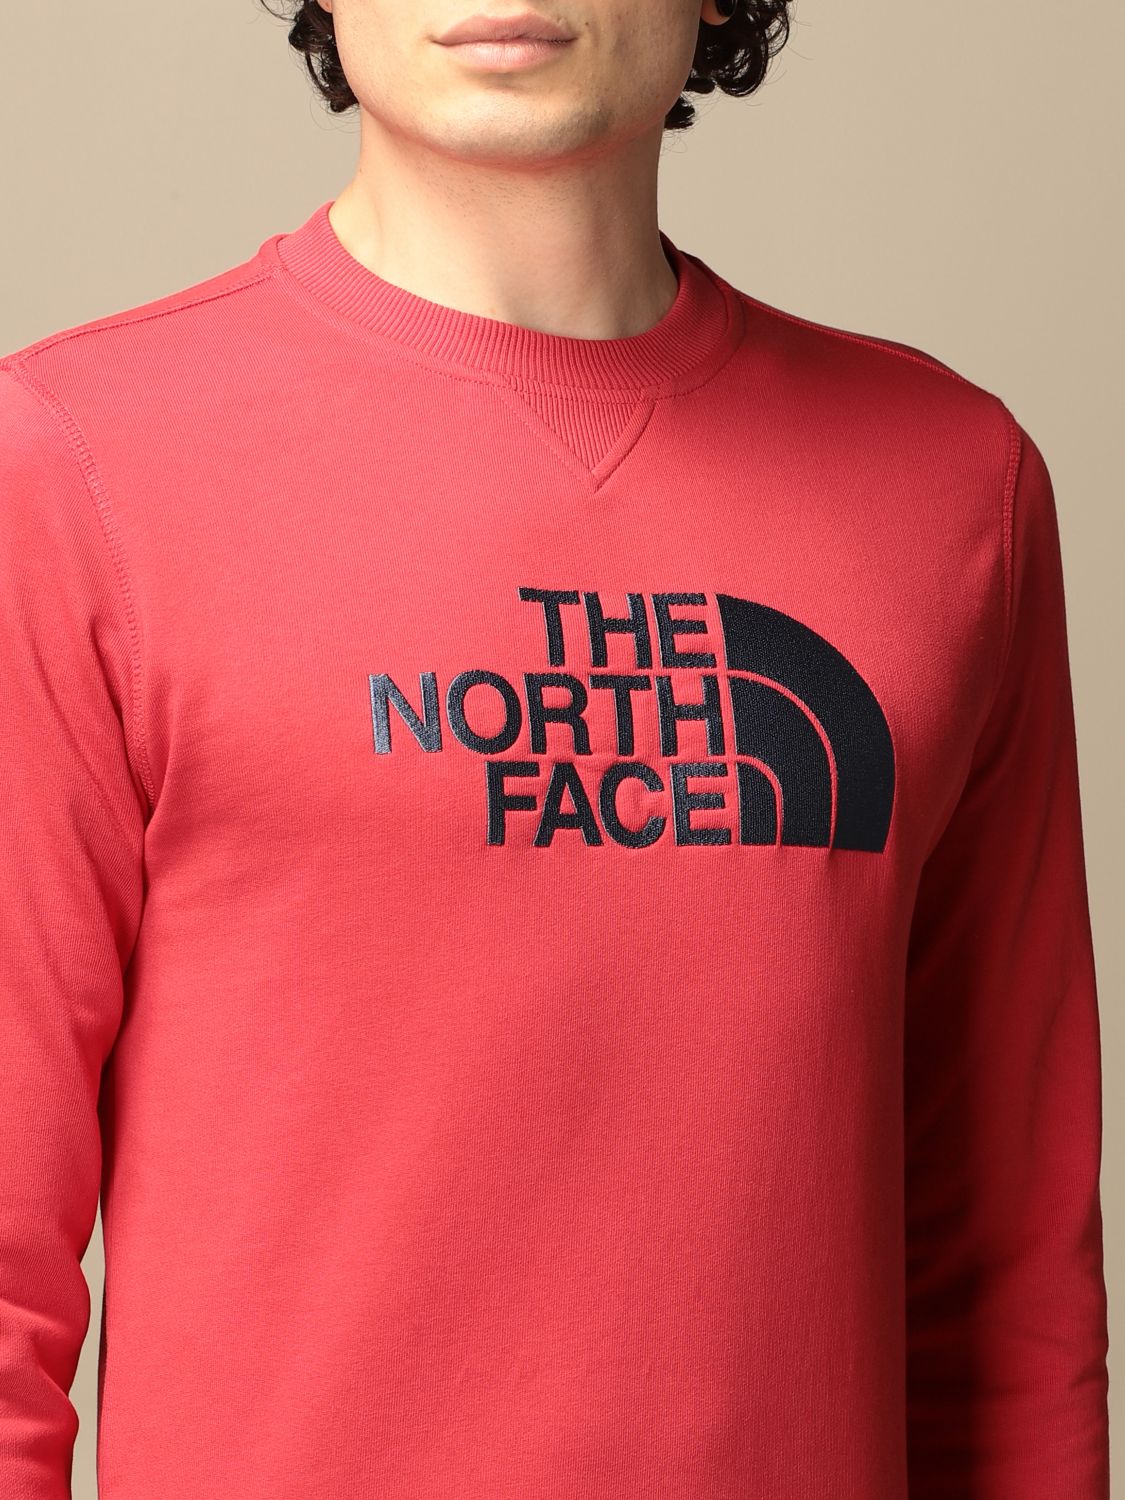 Sweatshirt The North Face: Sweatshirt homme The North Face rouge 3